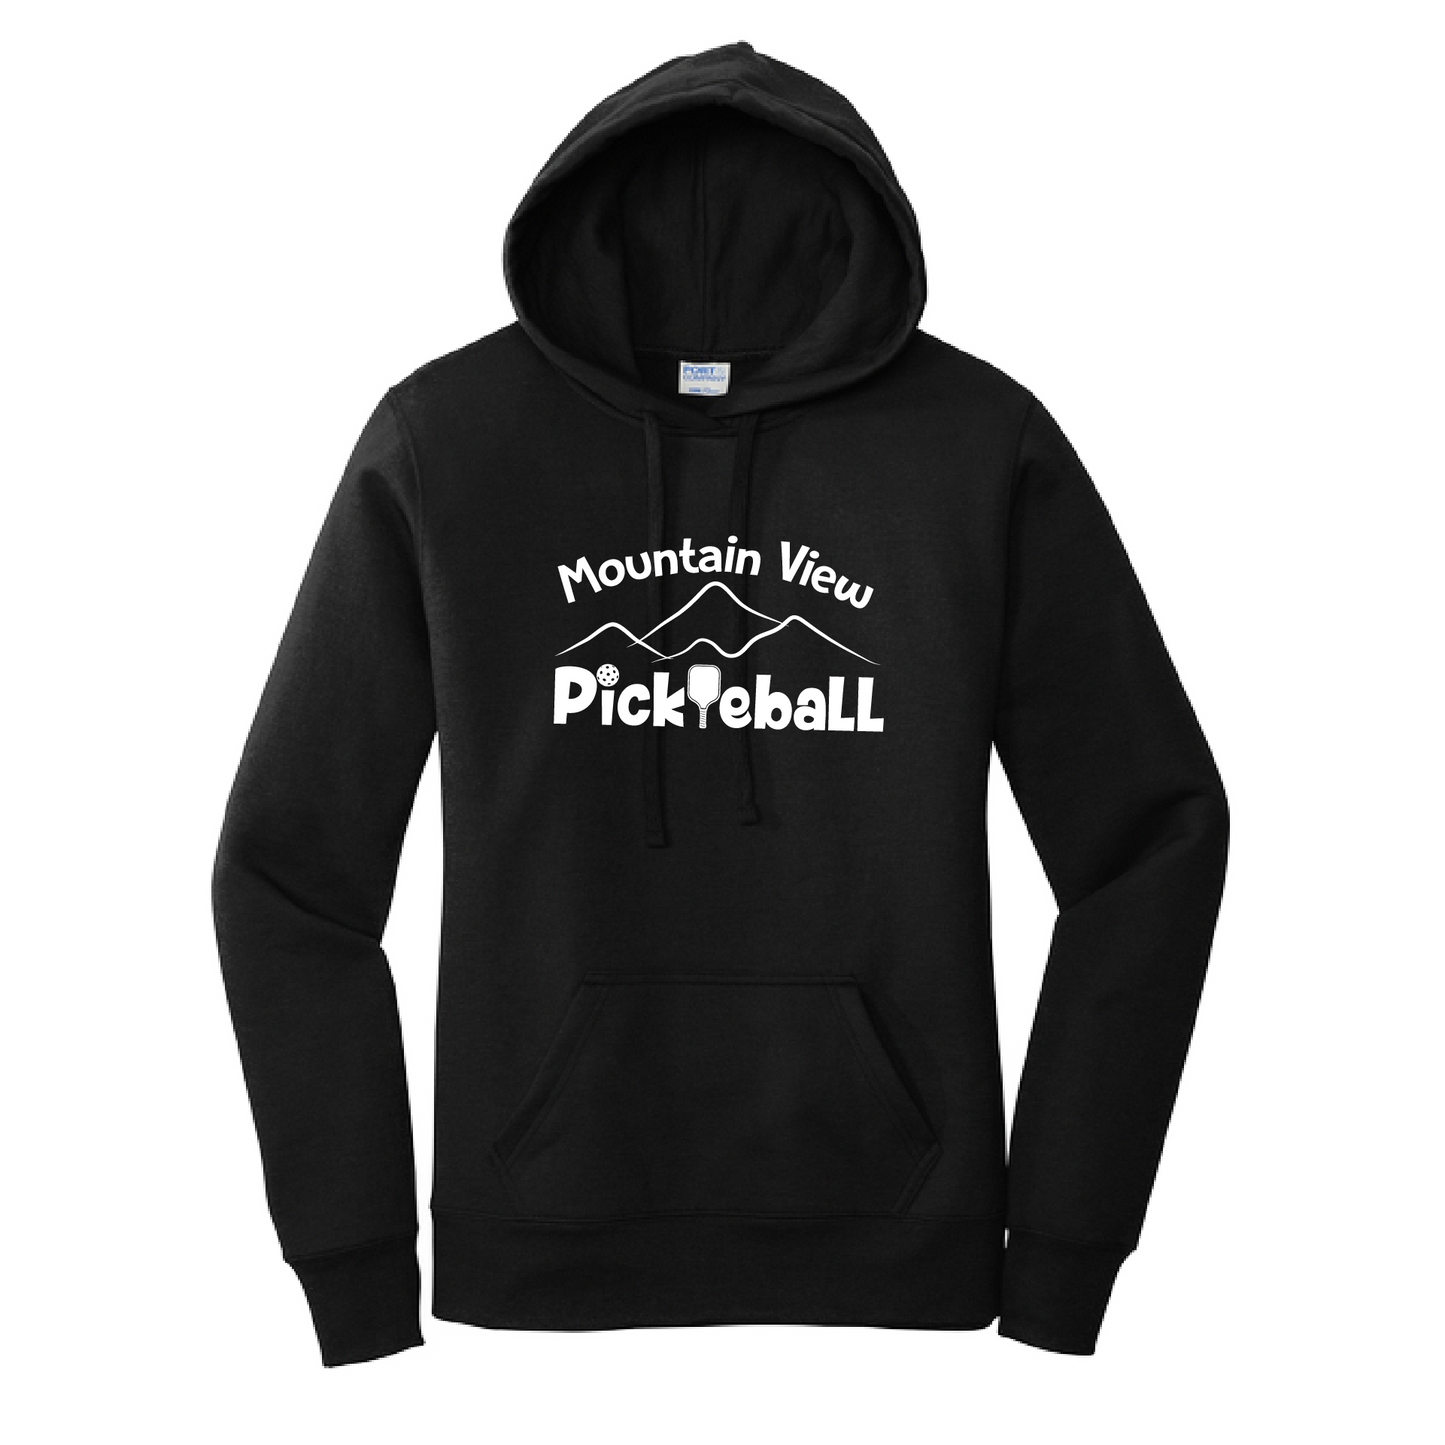 Pickleball Design: Mountain View Pickleball  Women's Hooded pullover Sweatshirt  Turn up the volume in this Women's Sweatshirts with its perfect mix of softness and attitude. Ultra soft lined inside with a lined hood also. This is fitted nicely for a women's figure. Front pouch pocket.